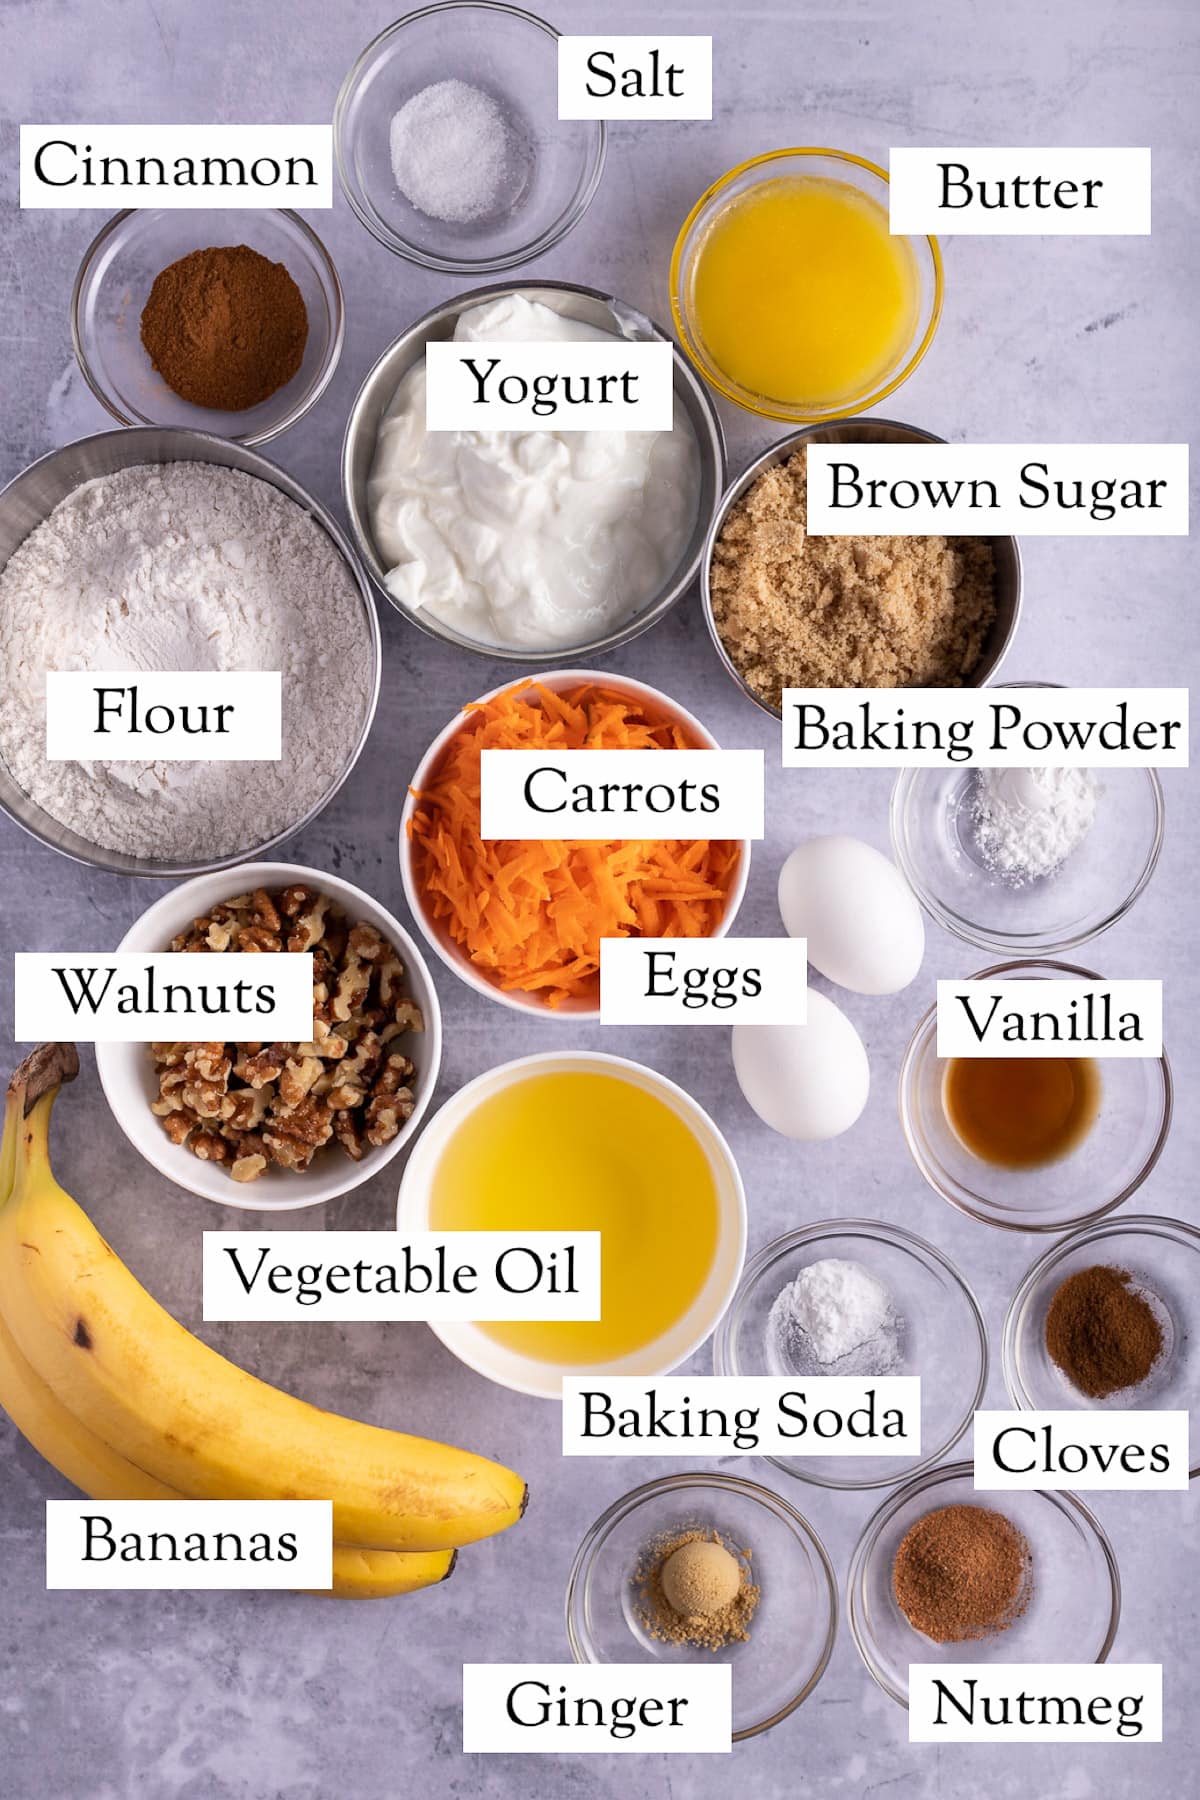 All of the ingredients that are needed to make the muffins.